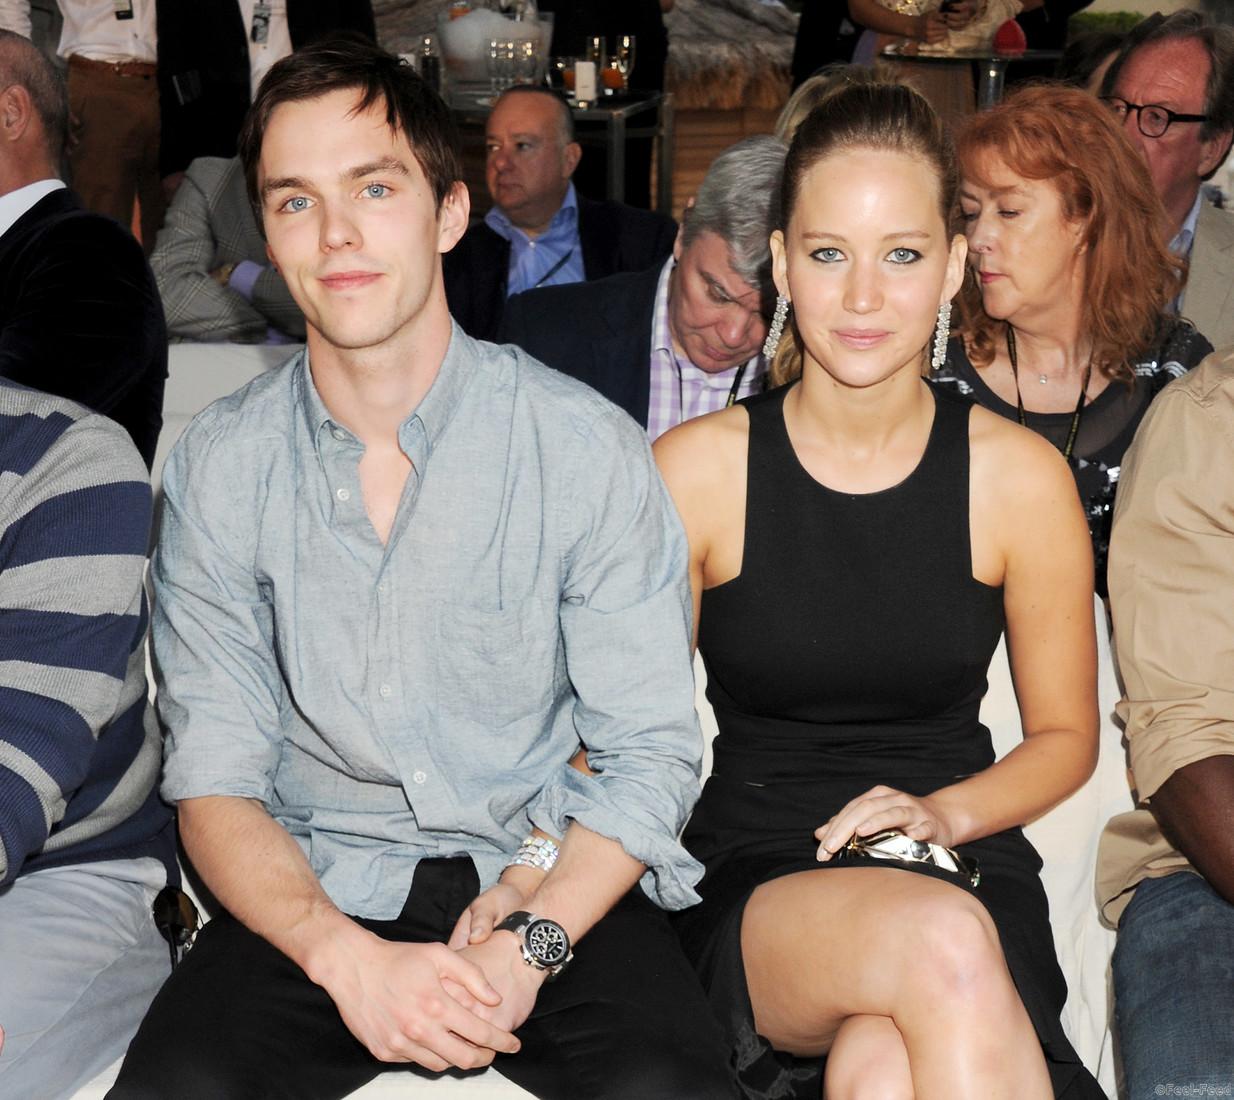 MONACO - MAY 25: (EMBARGOED FOR PUBLICATION IN UK TABLOID NEWSPAPERS UNTIL 48 HOURS AFTER CREATE DATE AND TIME. MANDATORY CREDIT PHOTO BY DAVE M. BENETT/GETTY IMAGES REQUIRED) Actors Nicholas Hoult (L) and Jennifer Lawrence attend a cocktail reception during Amber Lounge Fashion Monaco 2012 at Le Meridien Beach Plaza Hotel on May 25, 2012 in Monaco, Monaco (Photo by Dave M. Benett/Getty Images)